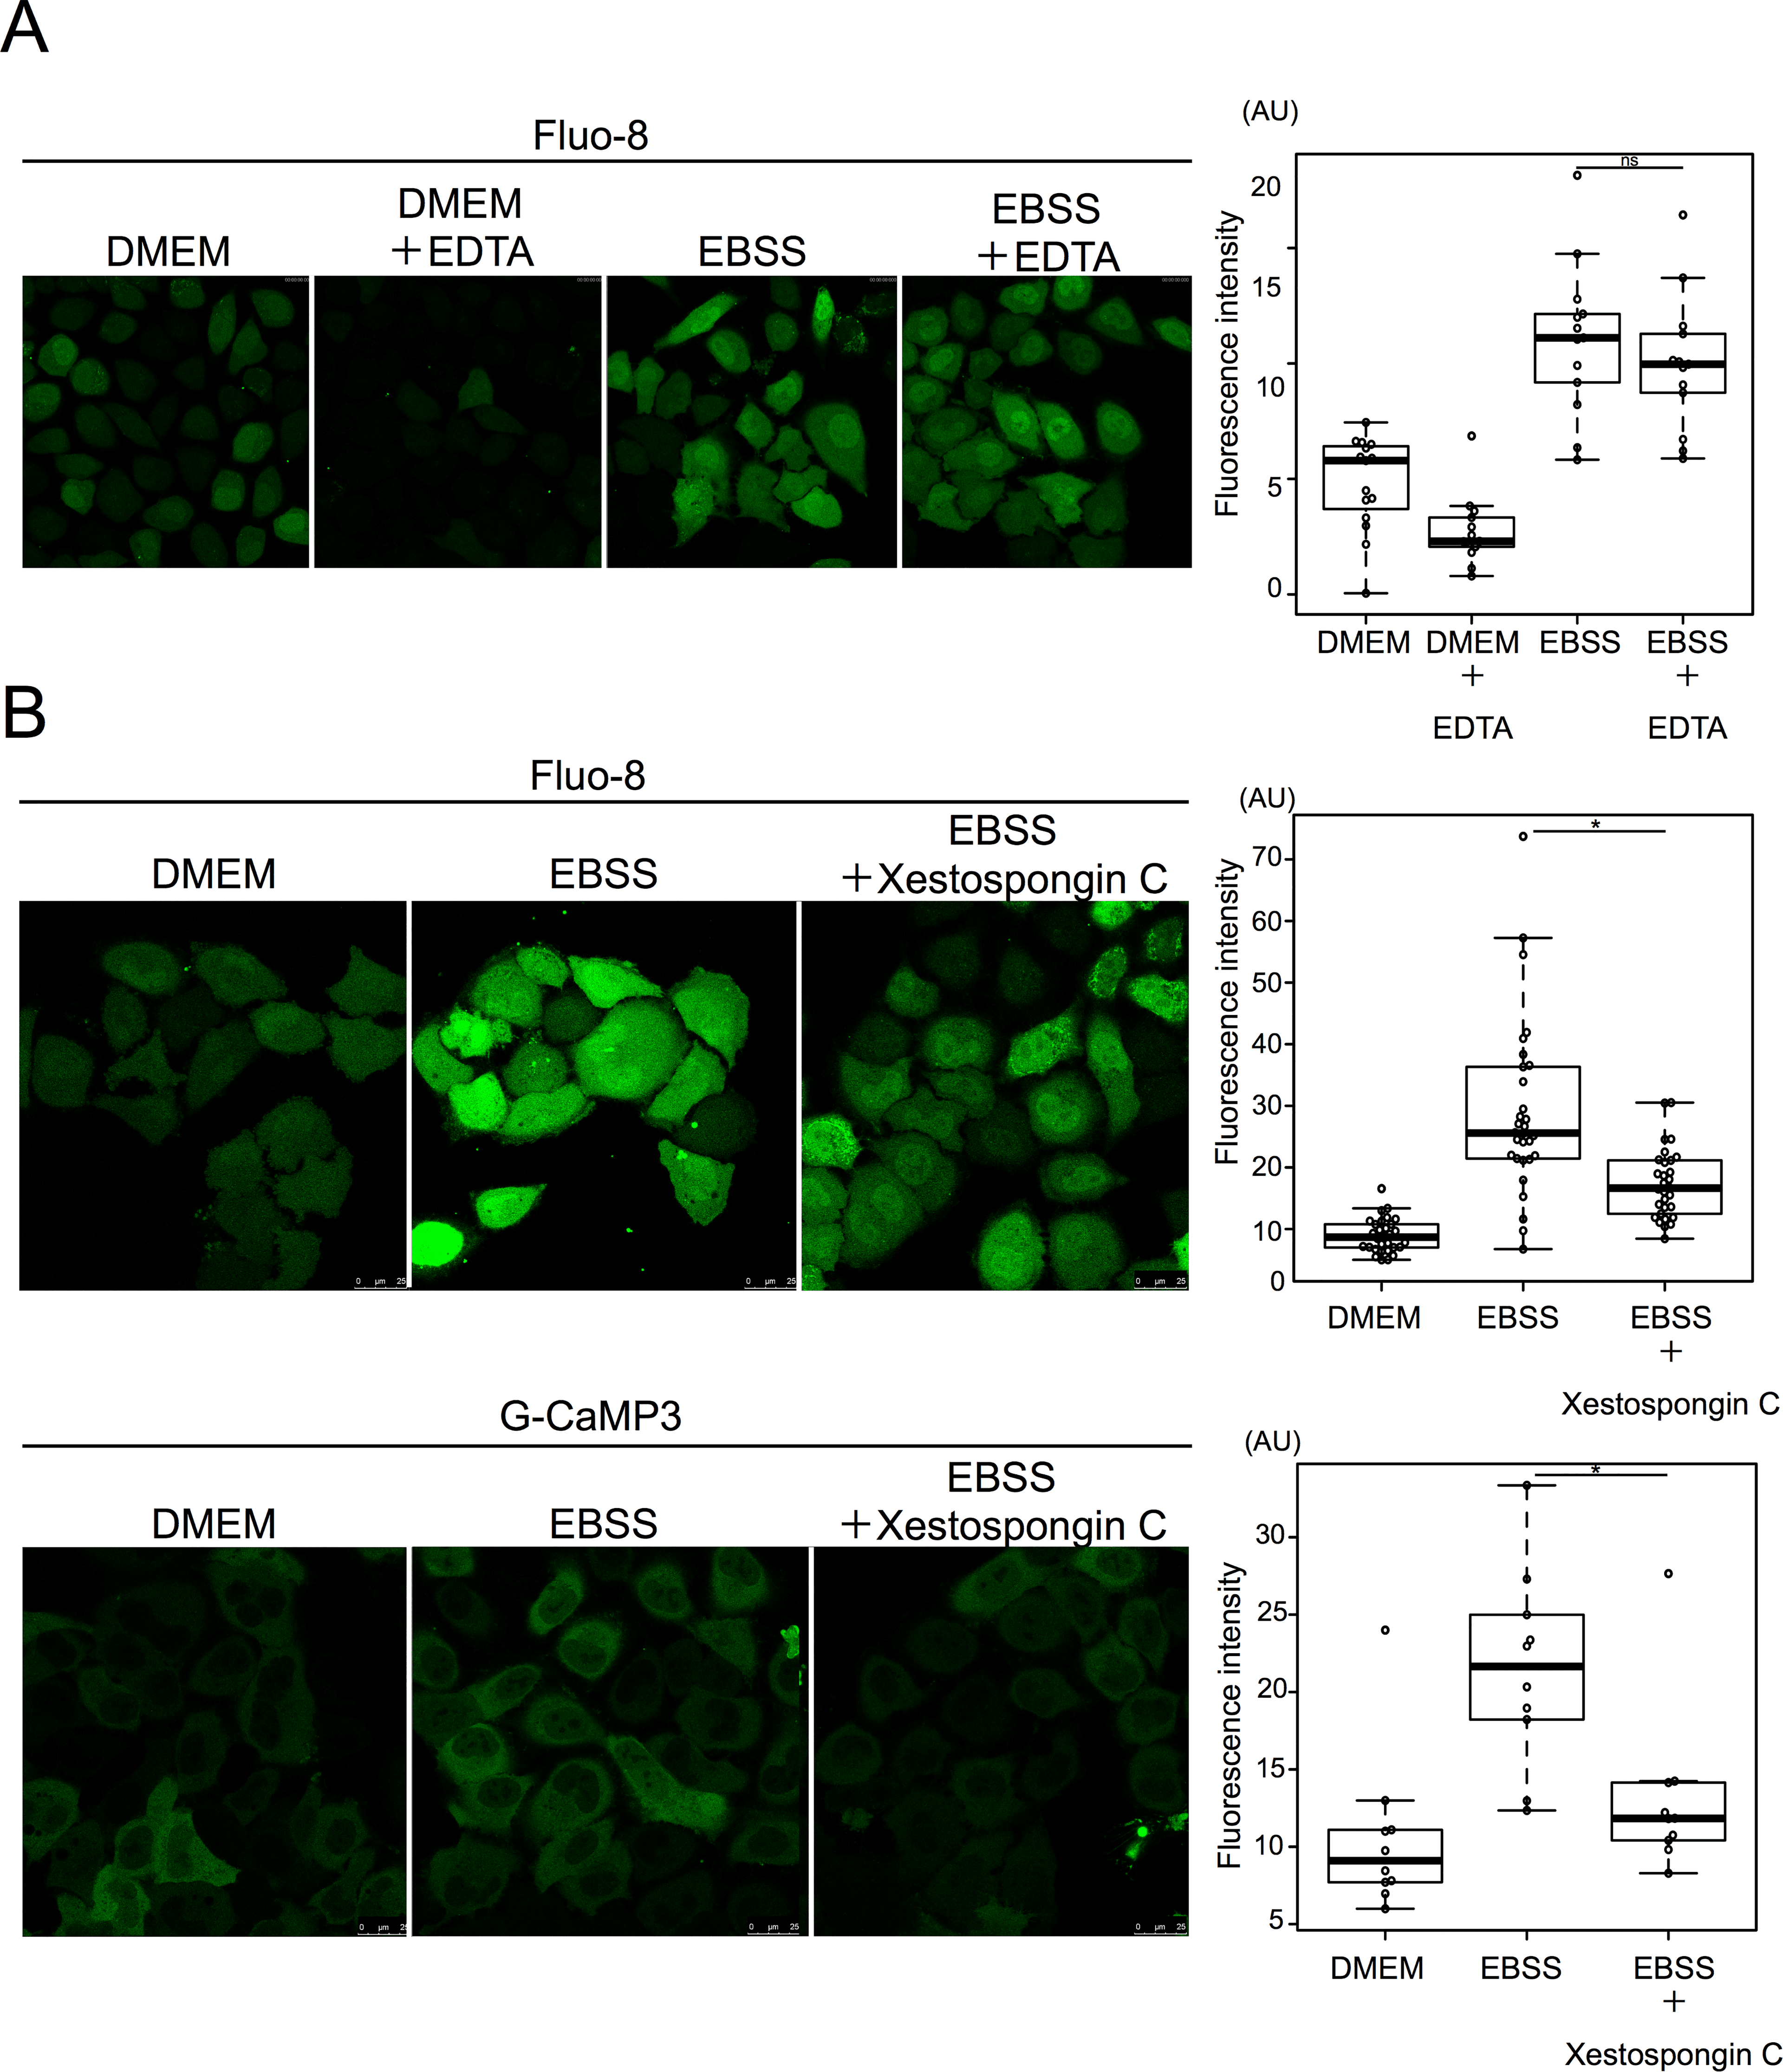 Starvation induced calcium efflux from the ER mediated by the IP3 receptor. A. HeLa cells were cultured with 0.5 mM EDTA in EBSS for 90 min and then stained with Fluo-8 for 30 min. 15 cells were counted in three independent experiments. B. HeLa cells were treated with or without xestospongin C in DMEM or EBSS for 90 min, and then stained with Fluo-8 for 30 min. 15 cells were counted in three independent experiments. HeLa cells were transiently transfected with G-CaMP3 and shifted to DMEM or EBSS with or without xestospongin C for 2 h. 30 cells were counted in three independent experiments. Fluorescence intensity was measured in ROI within cytoplasm. Median: line; upper and lower quartiles: boxes; 1.5-interquartile range: whiskers. * denotes p<0.05 (unpaired two-tailed Student’s t-test) between EBSS and EBSS plus drug treatment. Source: <b>Starvation-induced autophagy via calcium-dependent TFEB dephosphorylation is suppressed by Shigyakusan</b> by Ikari S, Lu S-L, Hao F, Imai K, Araki Y, Yamamoto Y-h, et al. <em>PLoS ONE</em> 15(3): e0230156. June 2023.